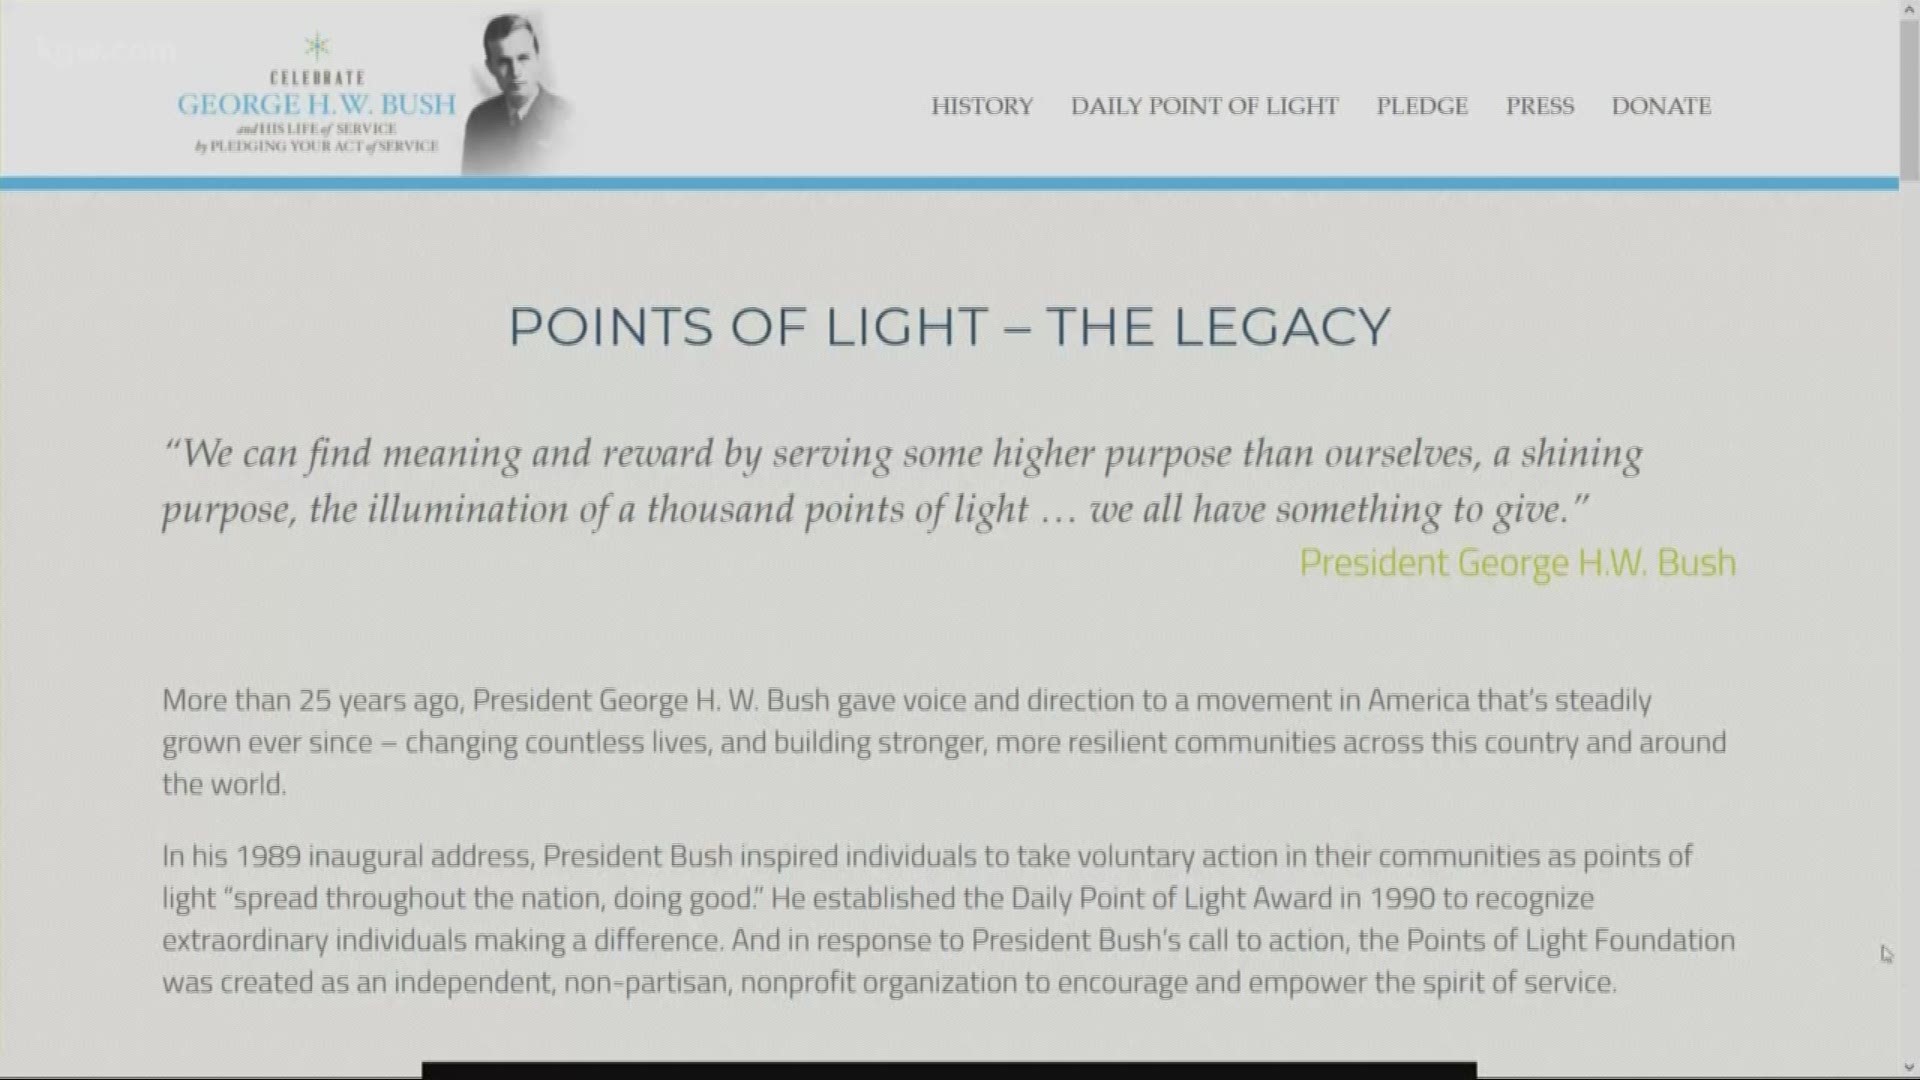 Former President George H.W. Bush created the "A Thousand Points of Light award" back in 1990 and also signed the Americans with Disabilities Act into law. These two initiatives are alive and well today, right here in Oregon.